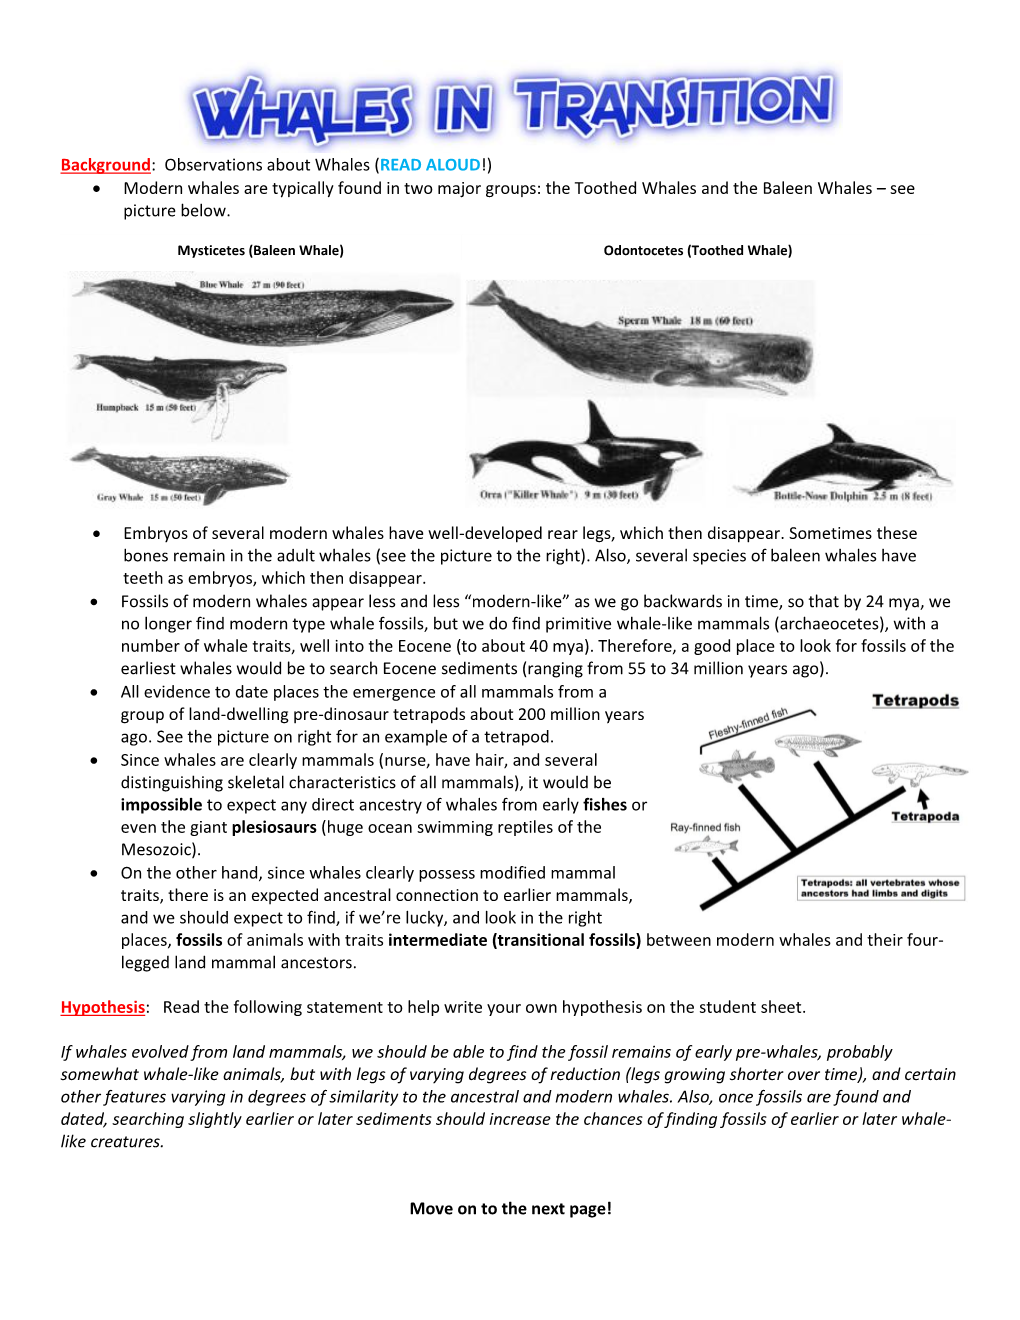 Background: Observations About Whales (READ ALOUD!) • Modern